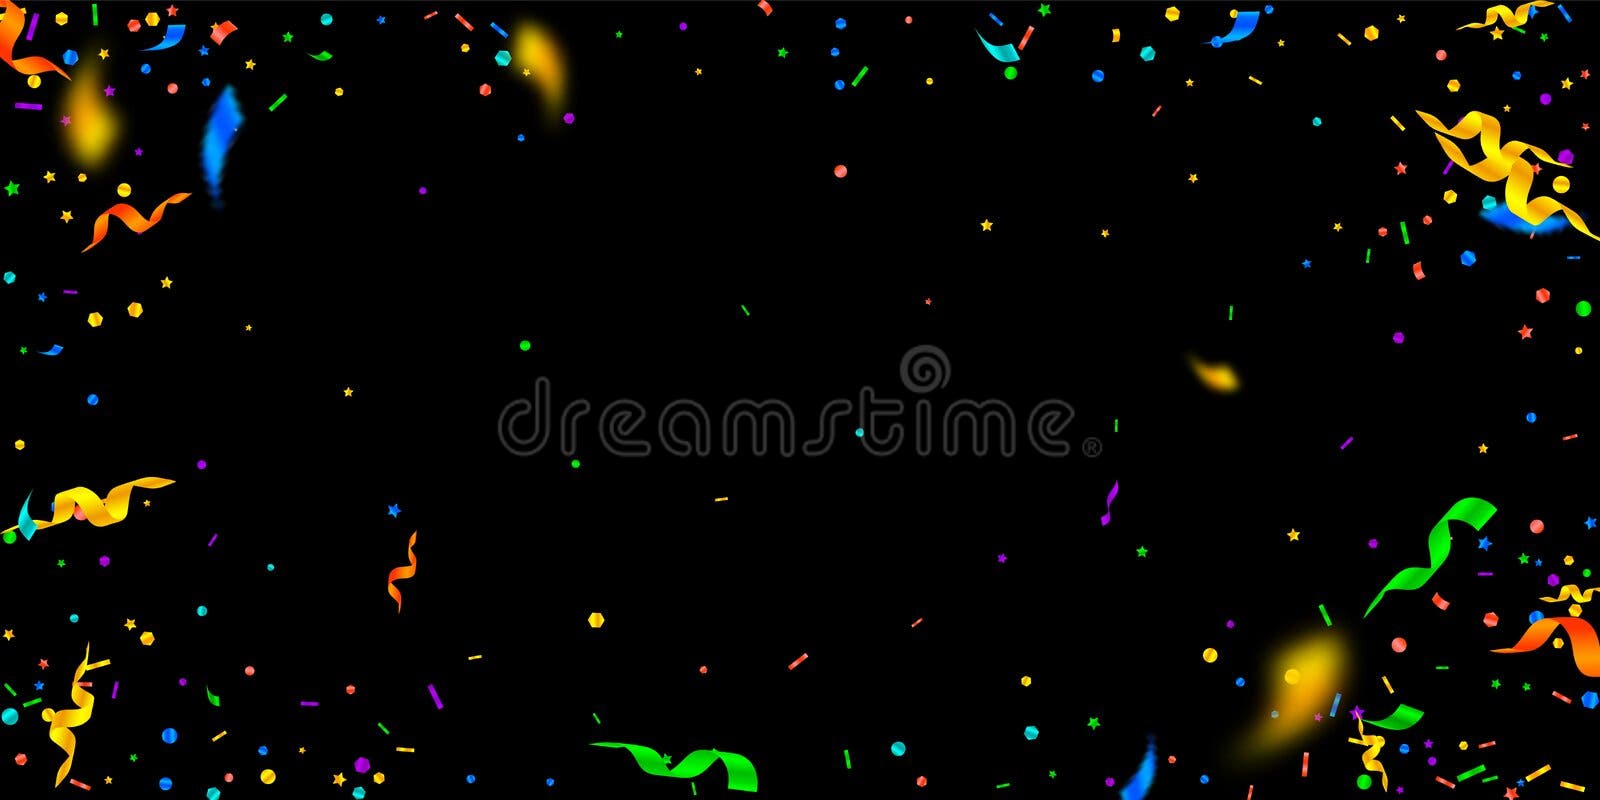 Streamers and confetti. Gold streamers tinsel and - Stock